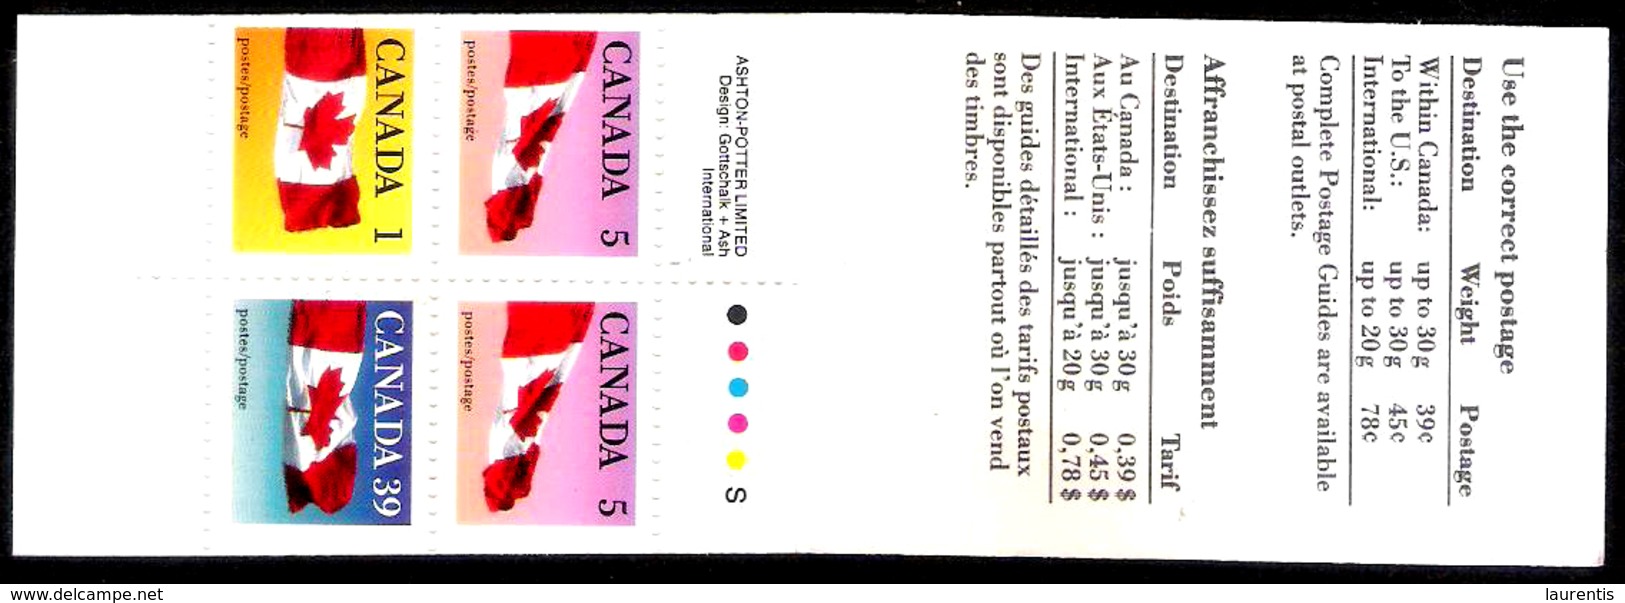 13071  Flags - Drapeaux - Canada - MNH - Booklet - Free Shipping - 1,75 - Covers